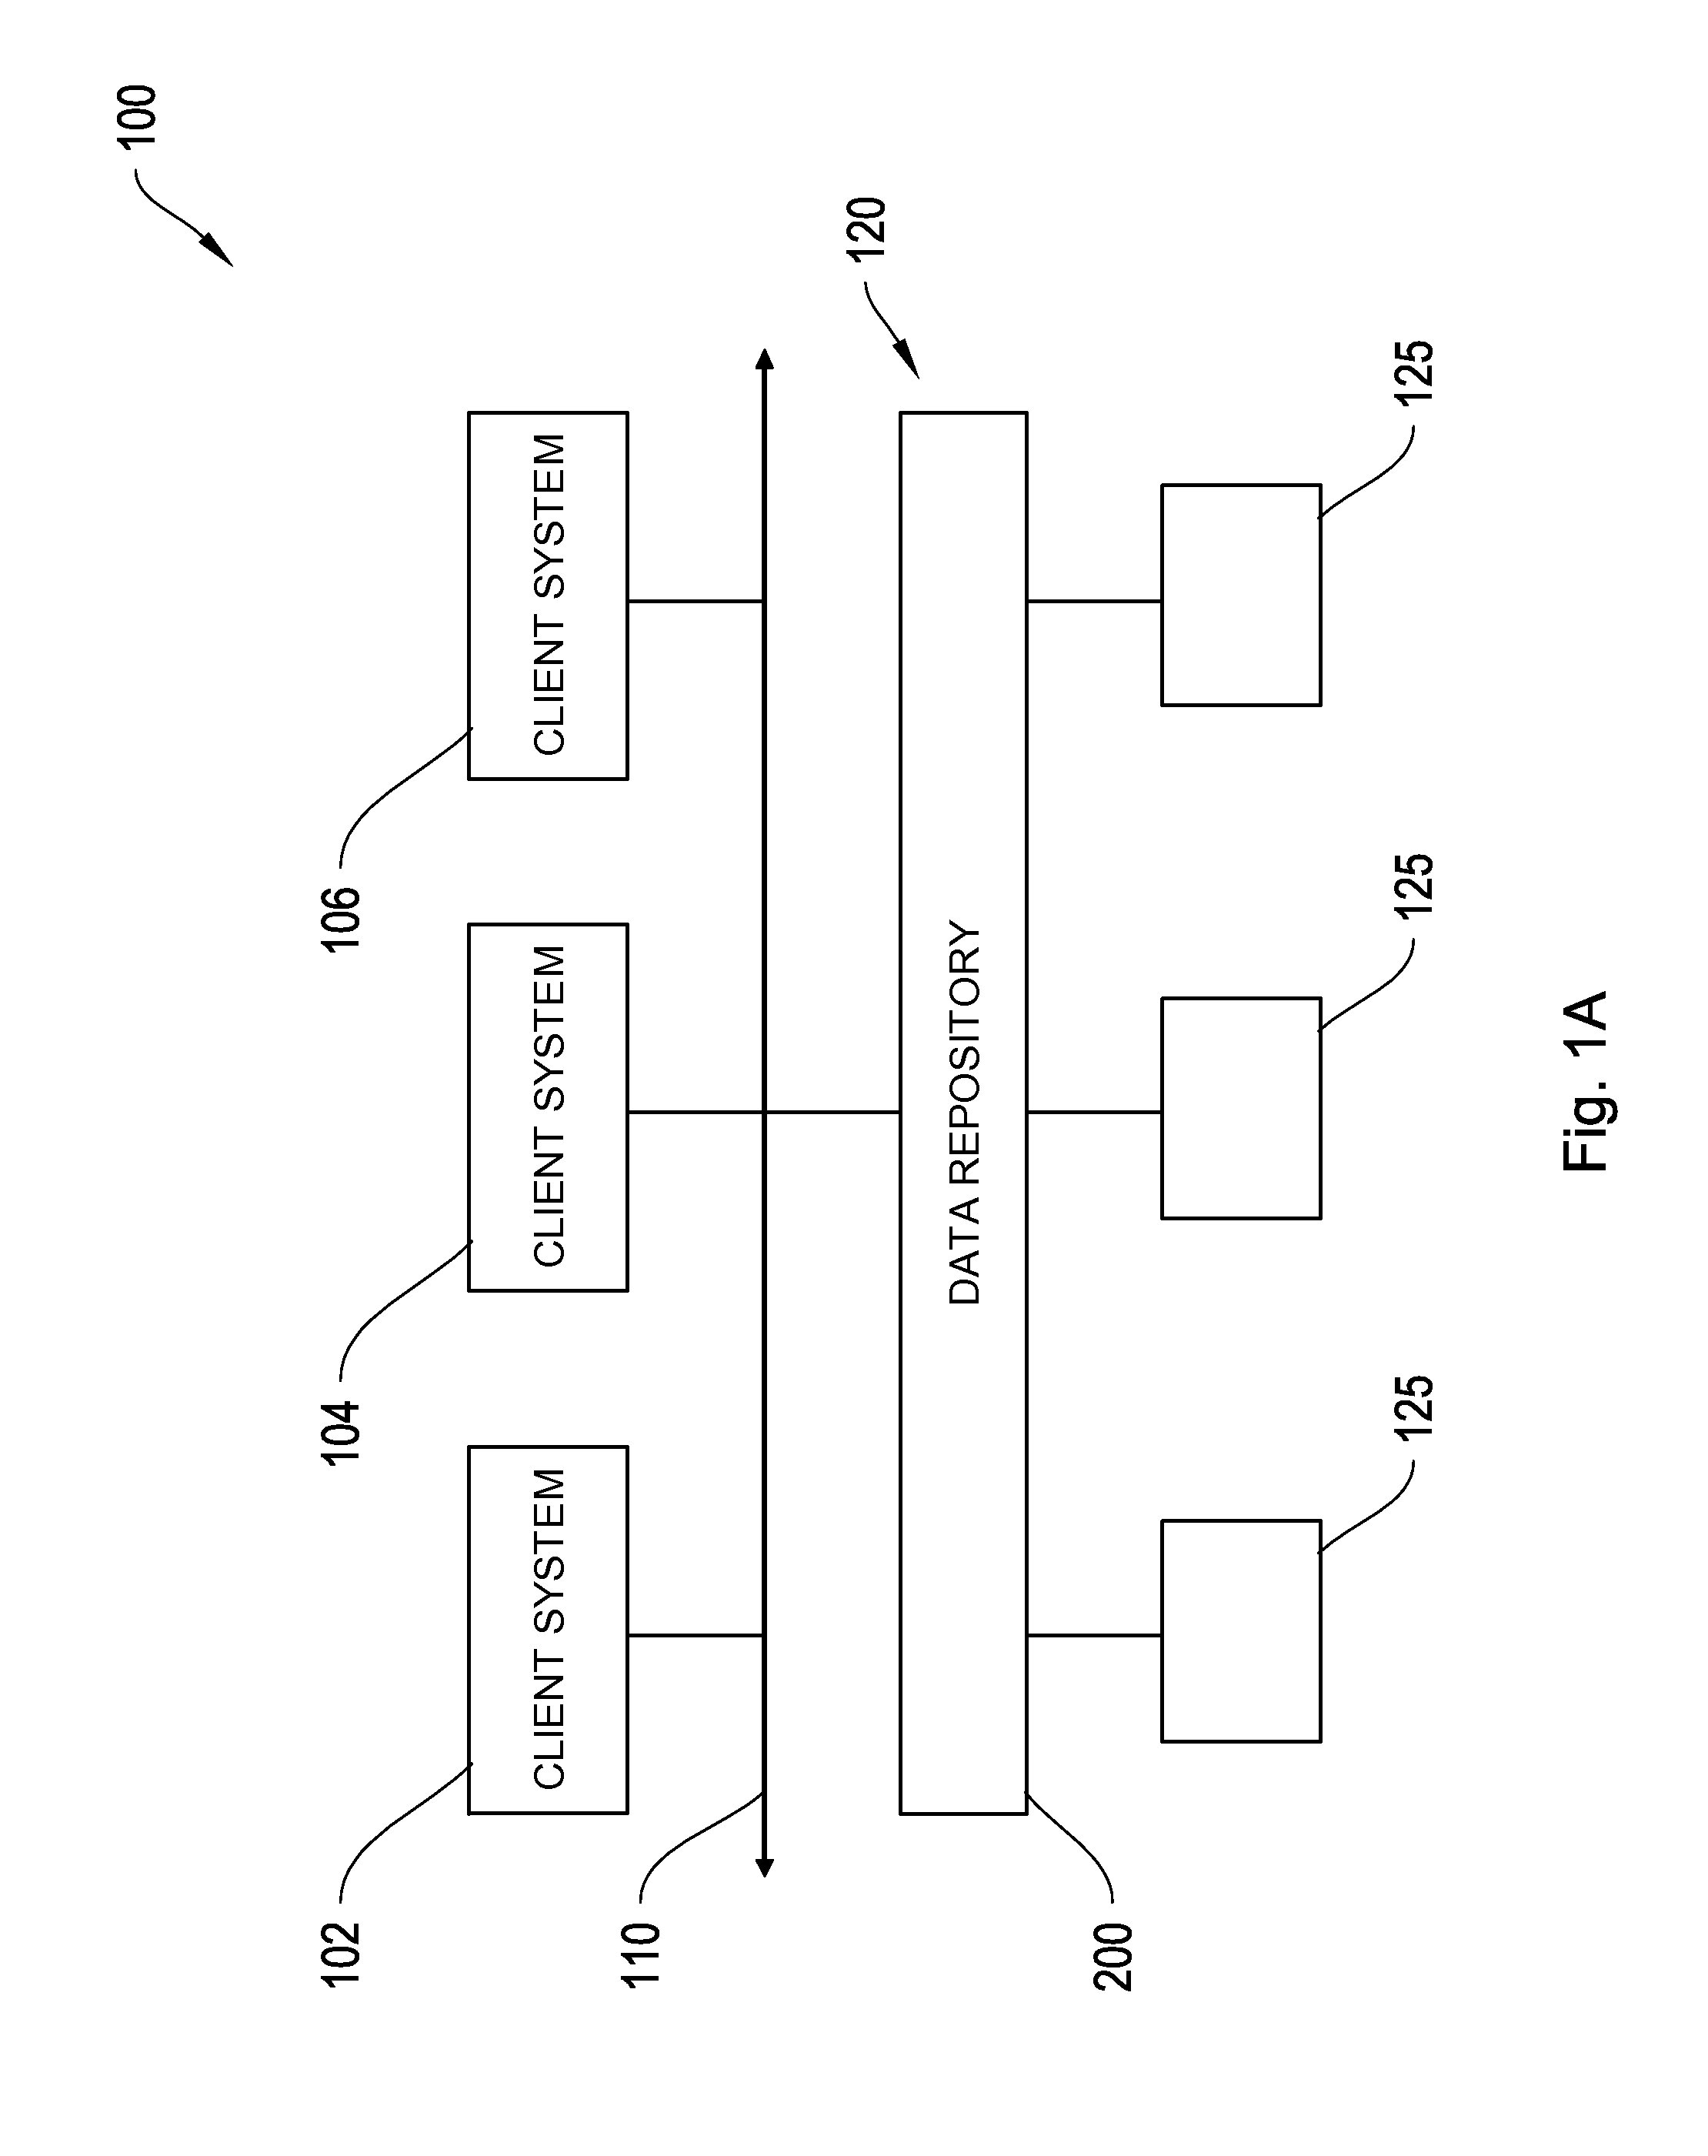 Systems and methods for caching data files